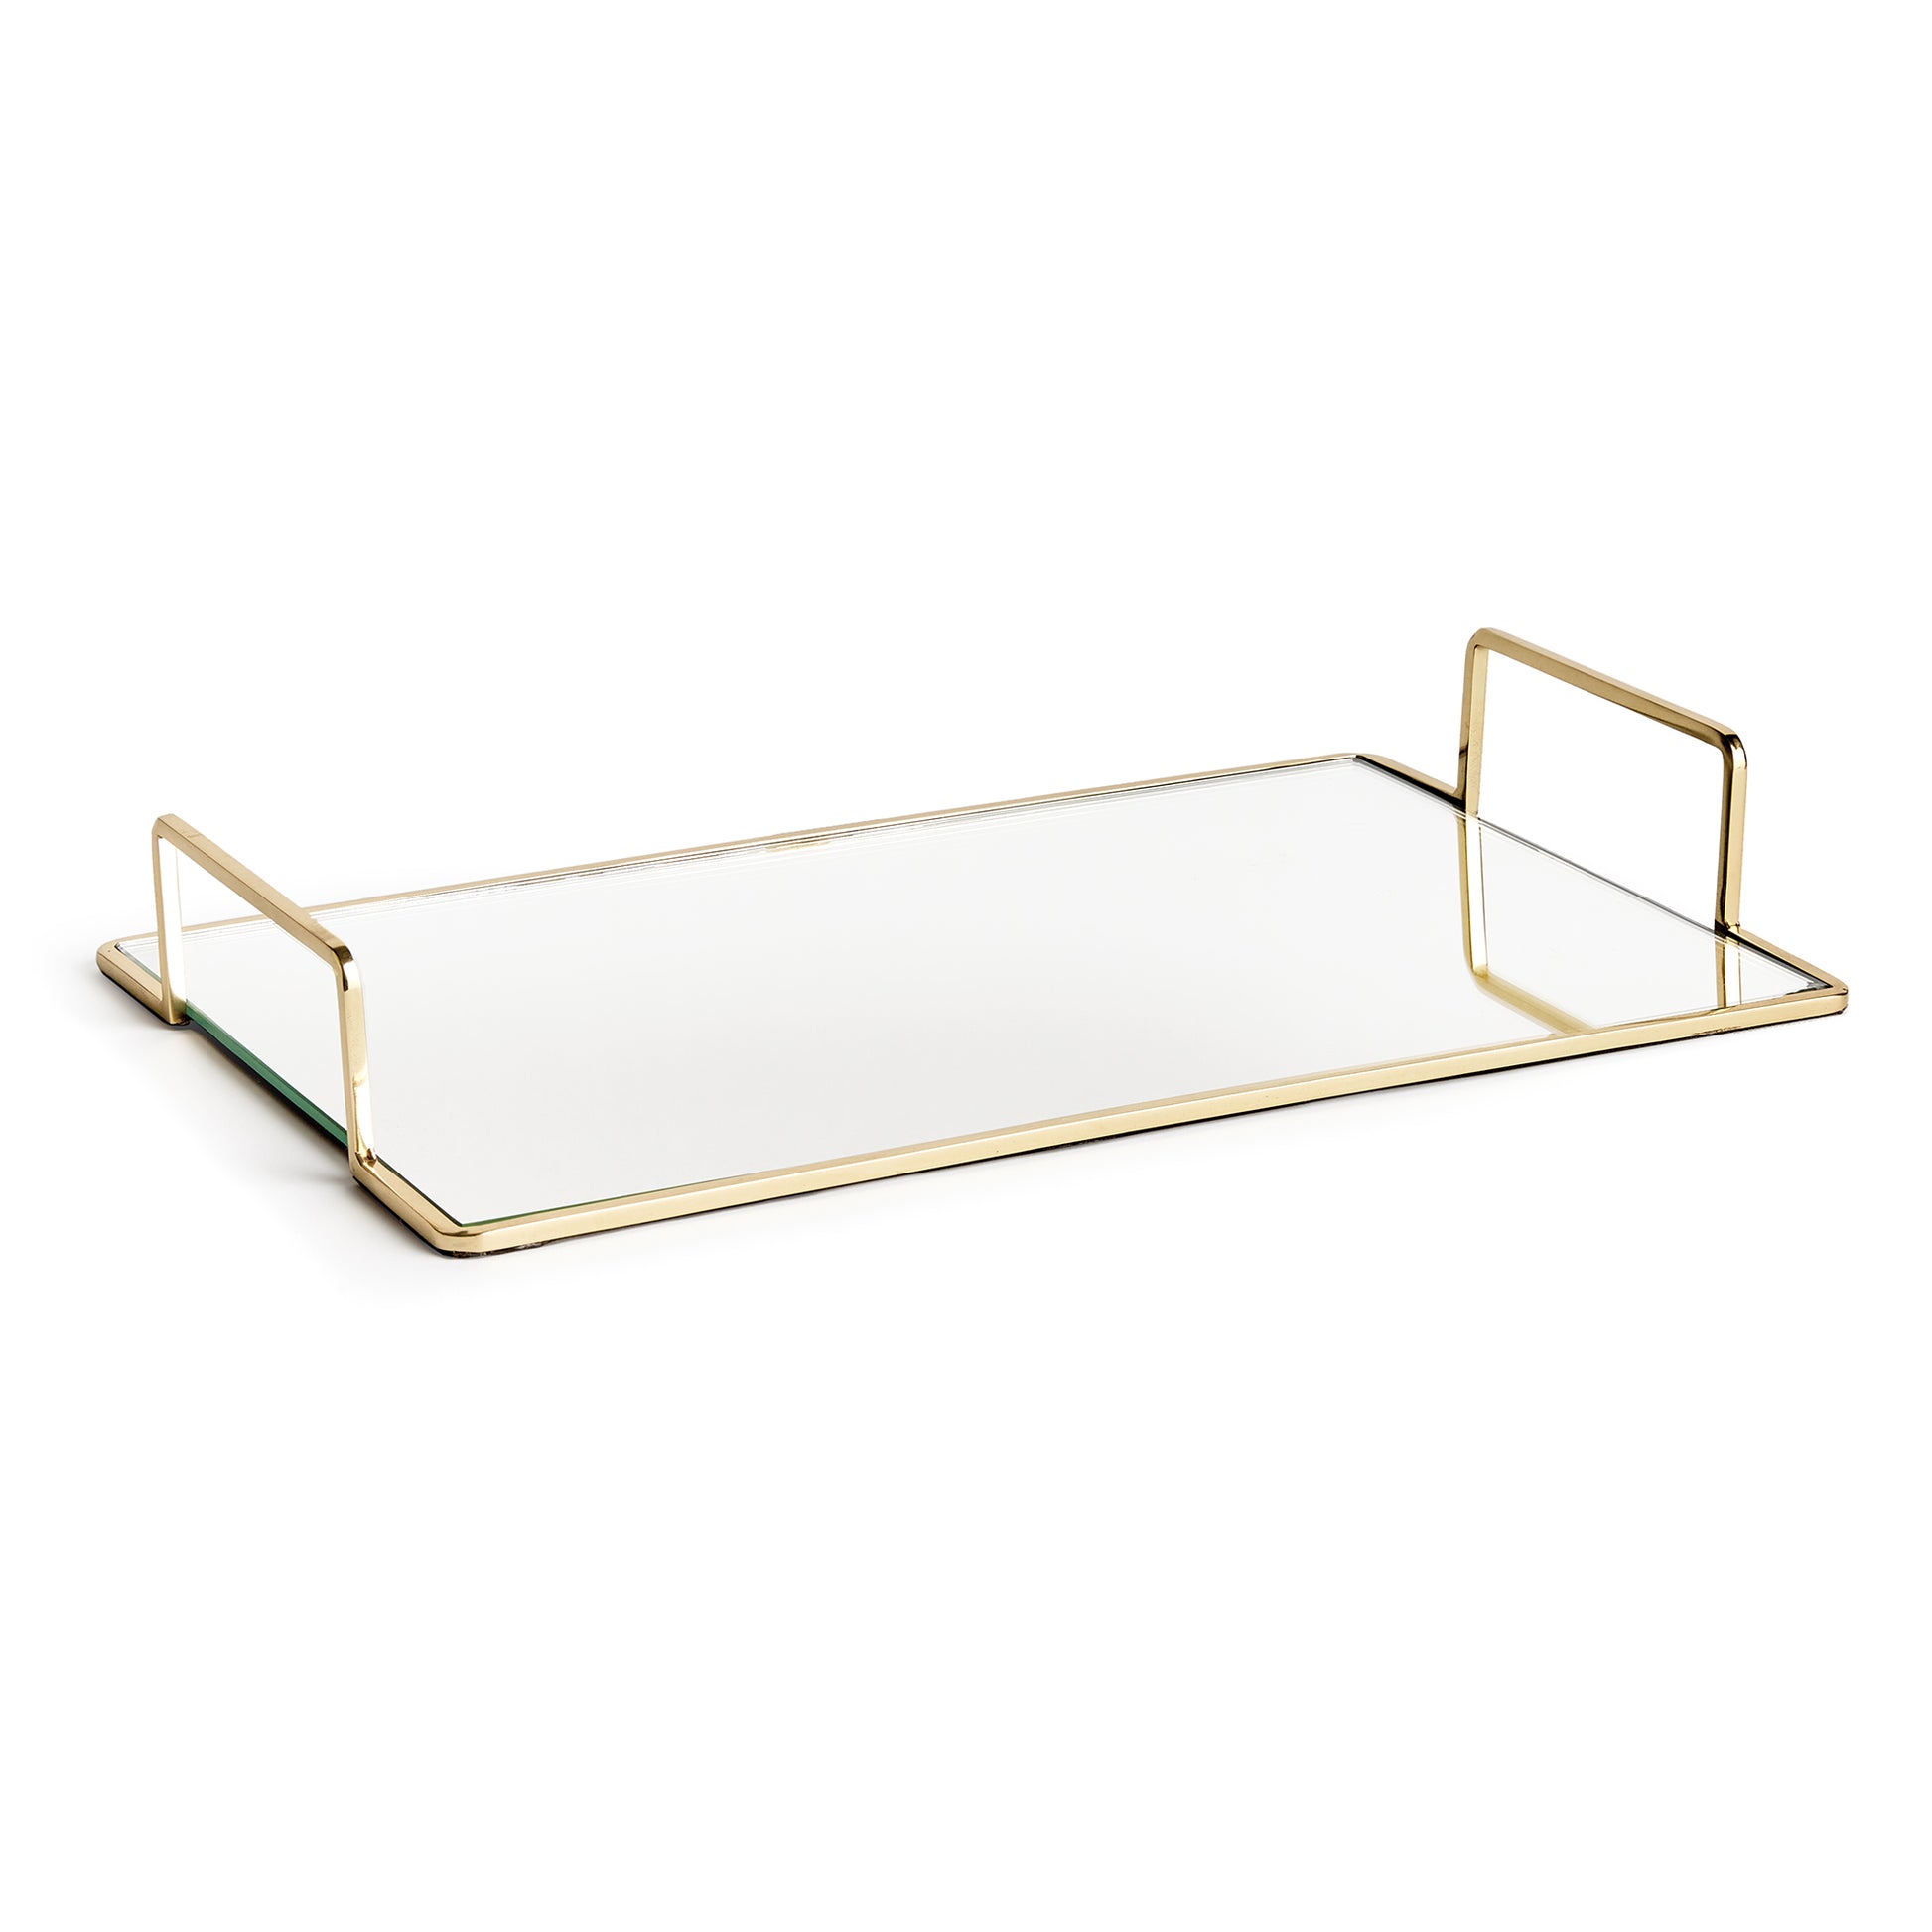 Smooth and streamlined, this mirrored tray is a clean and modern accent. Add to ottoman, side table or even the kitchen counter for a sleek look.